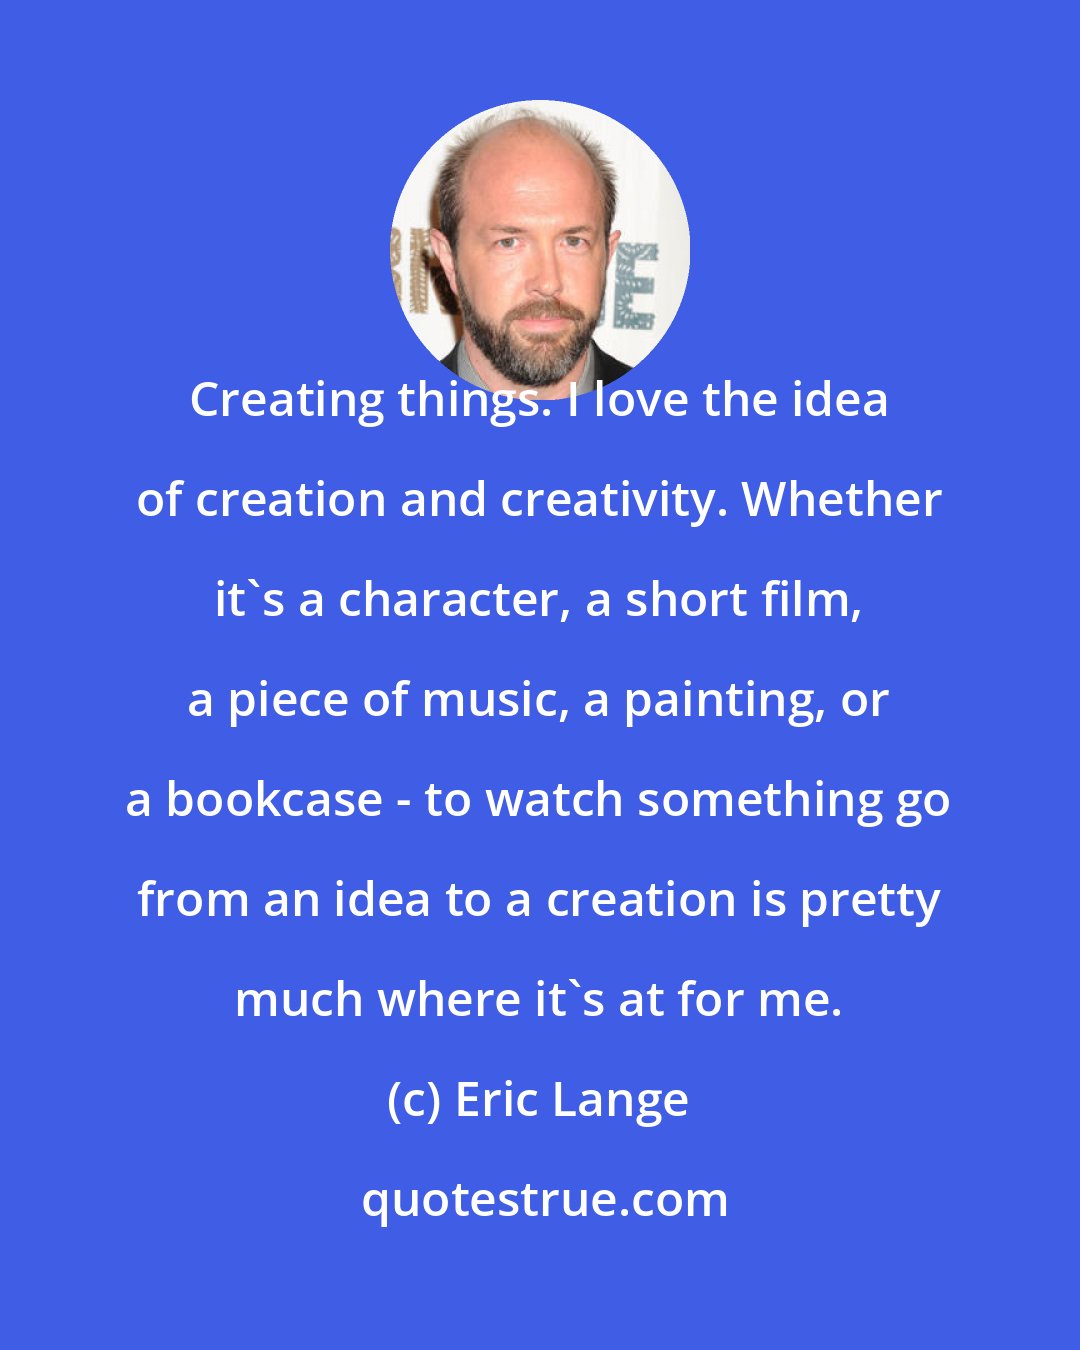 Eric Lange: Creating things. I love the idea of creation and creativity. Whether it's a character, a short film, a piece of music, a painting, or a bookcase - to watch something go from an idea to a creation is pretty much where it's at for me.